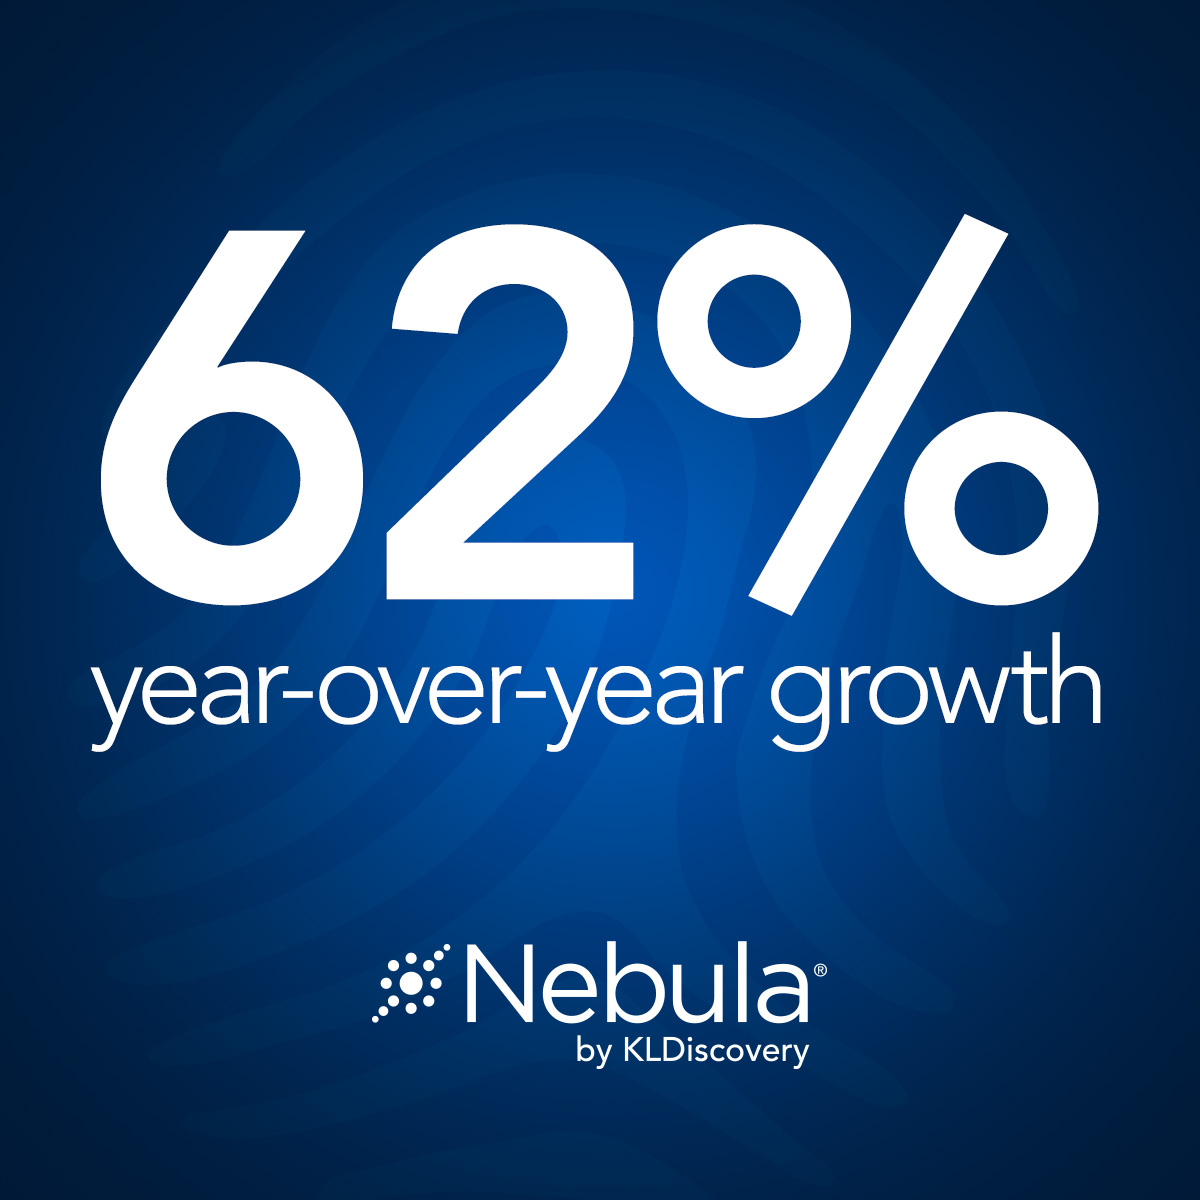 Nebula, KLDiscovery’s proprietary SaaS platform for legal, compliance, and investigation needs, experienced 62% year-over-year revenue growth in 2023. New AI features are planned for 2024 and 2025. kldiscovery.com/blog/kldiscove…

#LegalTech #eDiscovery #FutureOfLaw